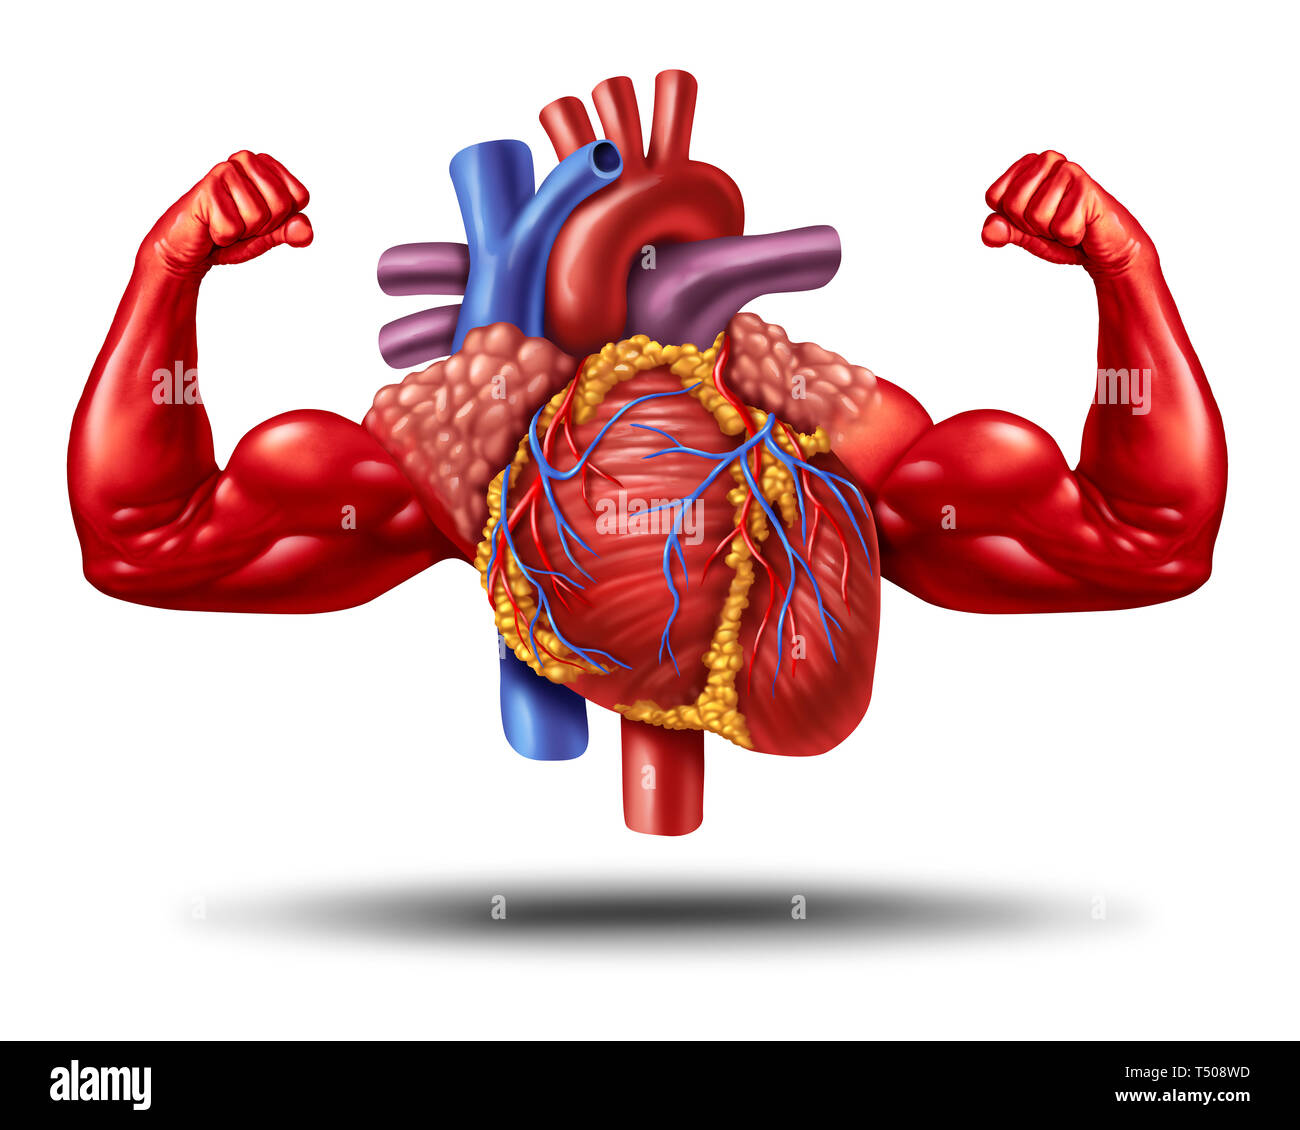 Strong healthy human heart as a cardiology fitness and health symbol or powerful cardio exercise as an anatomy organ with muscle biceps. Stock Photo